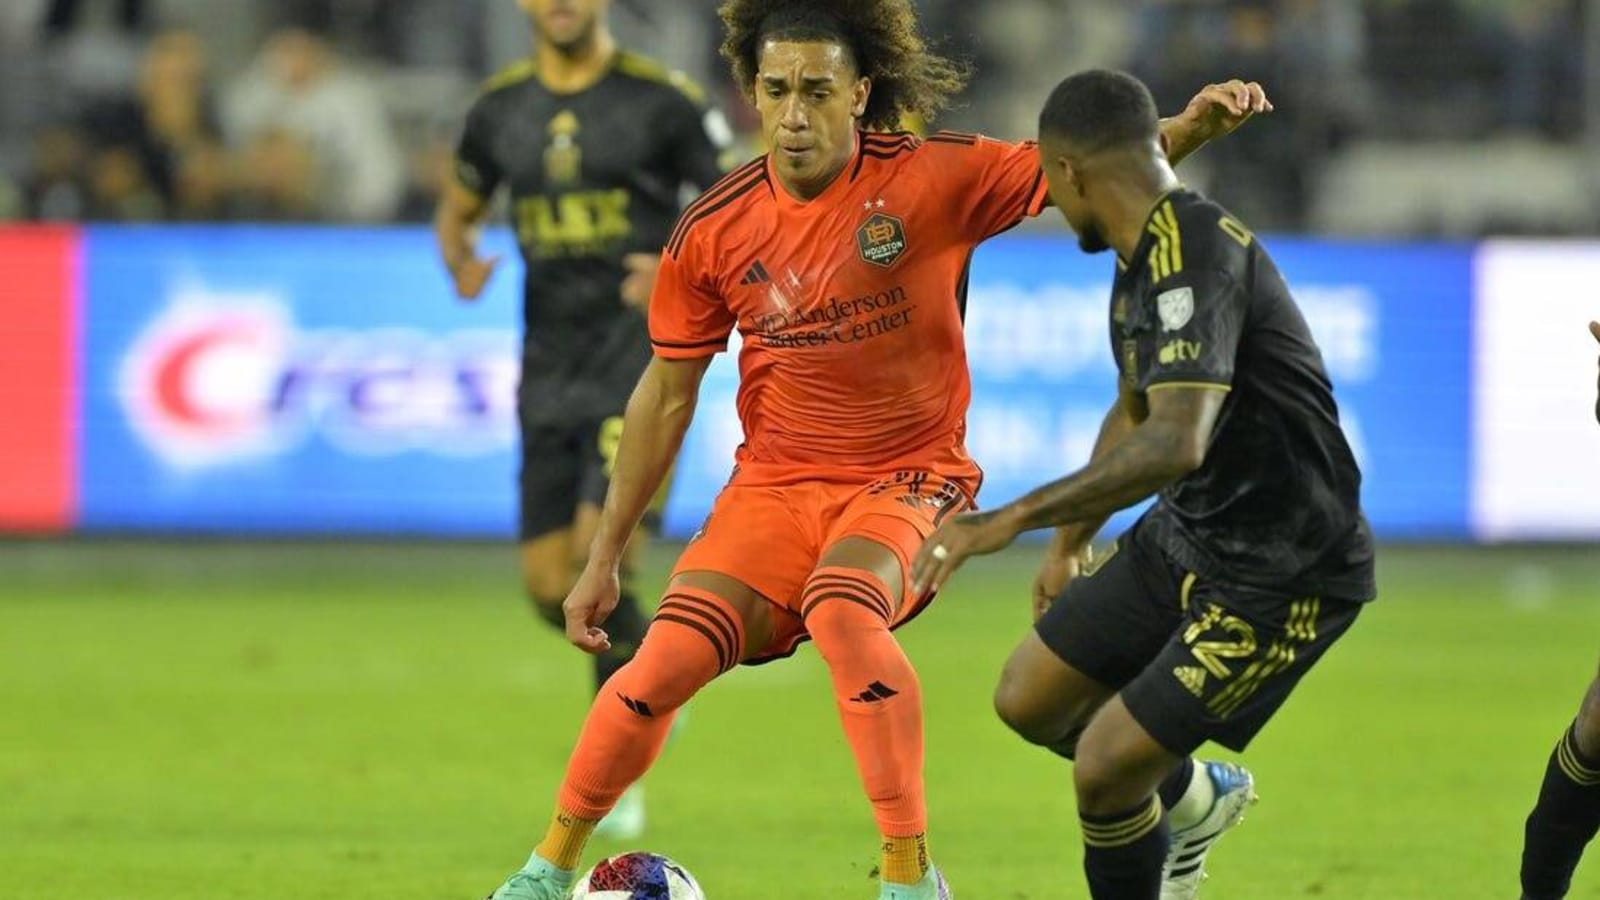 Dynamo sign M Coco Carrasquilla to new contract